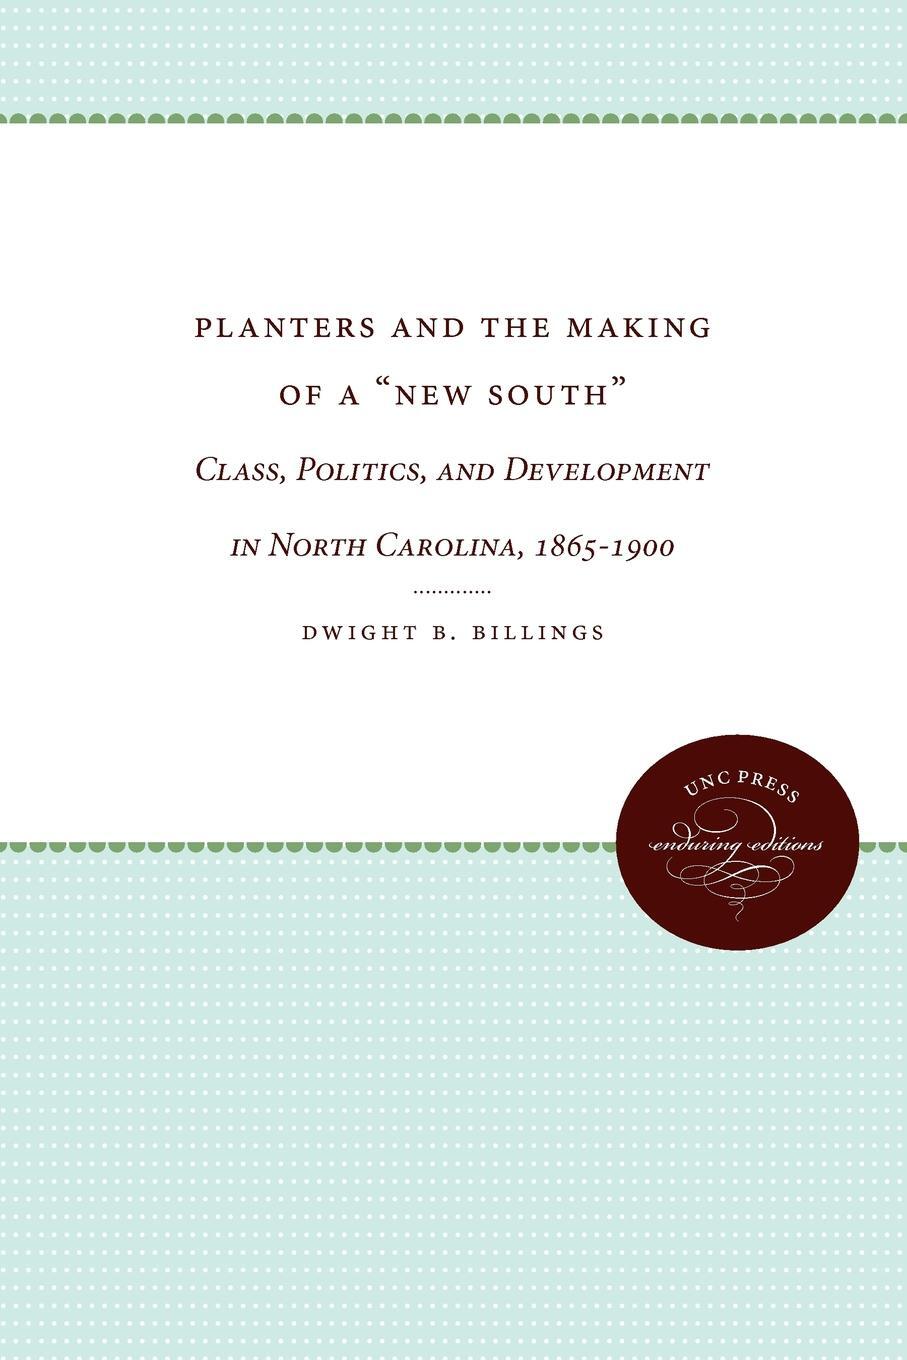 фото Planters and the Making of a "New South". Class, Politics, and Development in North Carolina, 1865-1900